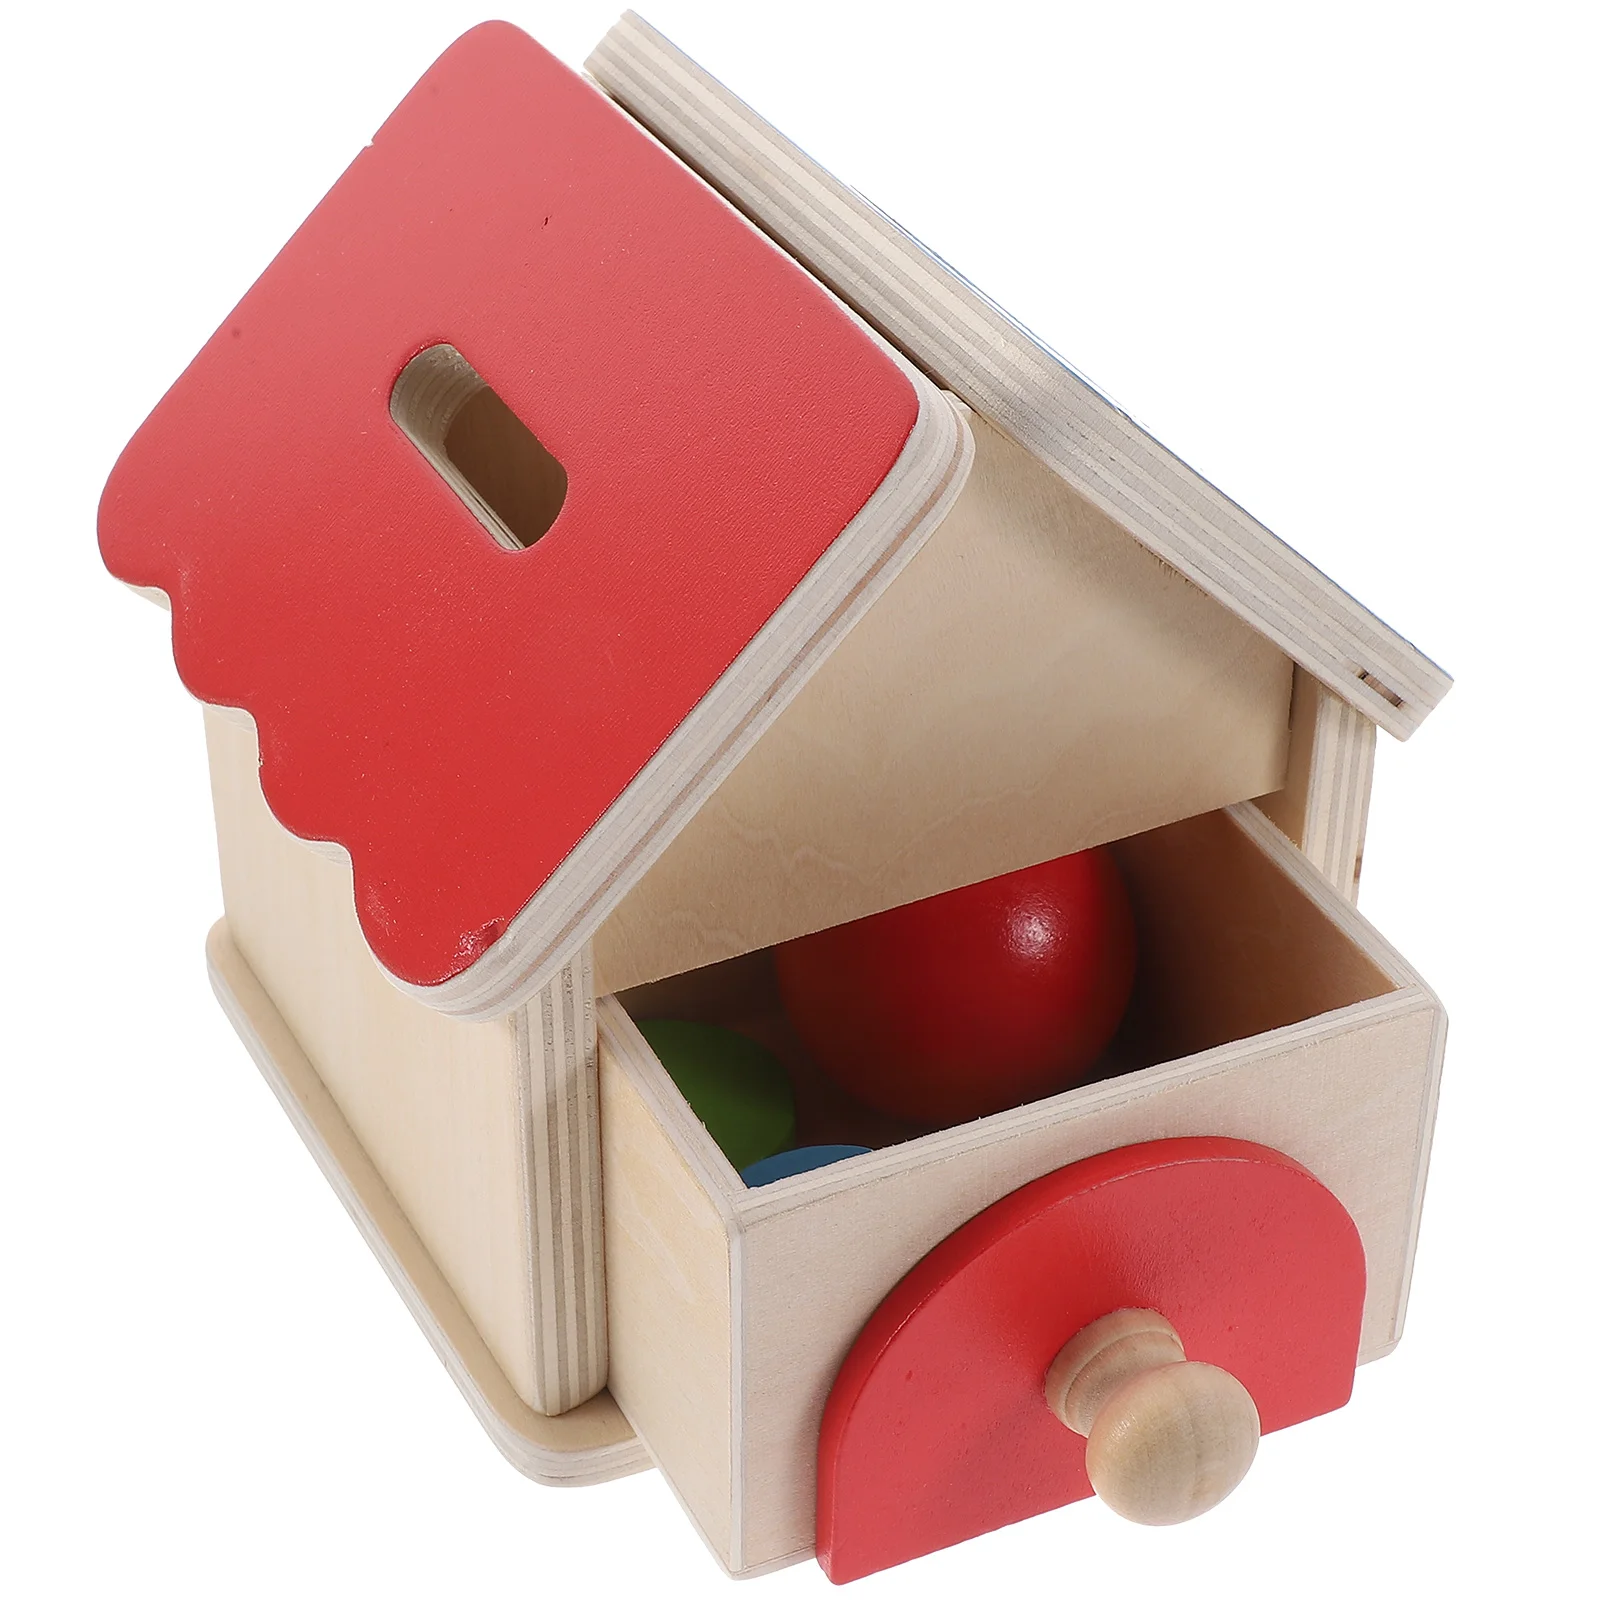 

1 Set Wooden Drawer Coin Box Ball Holding Box House Shaped Drawer Training Toy